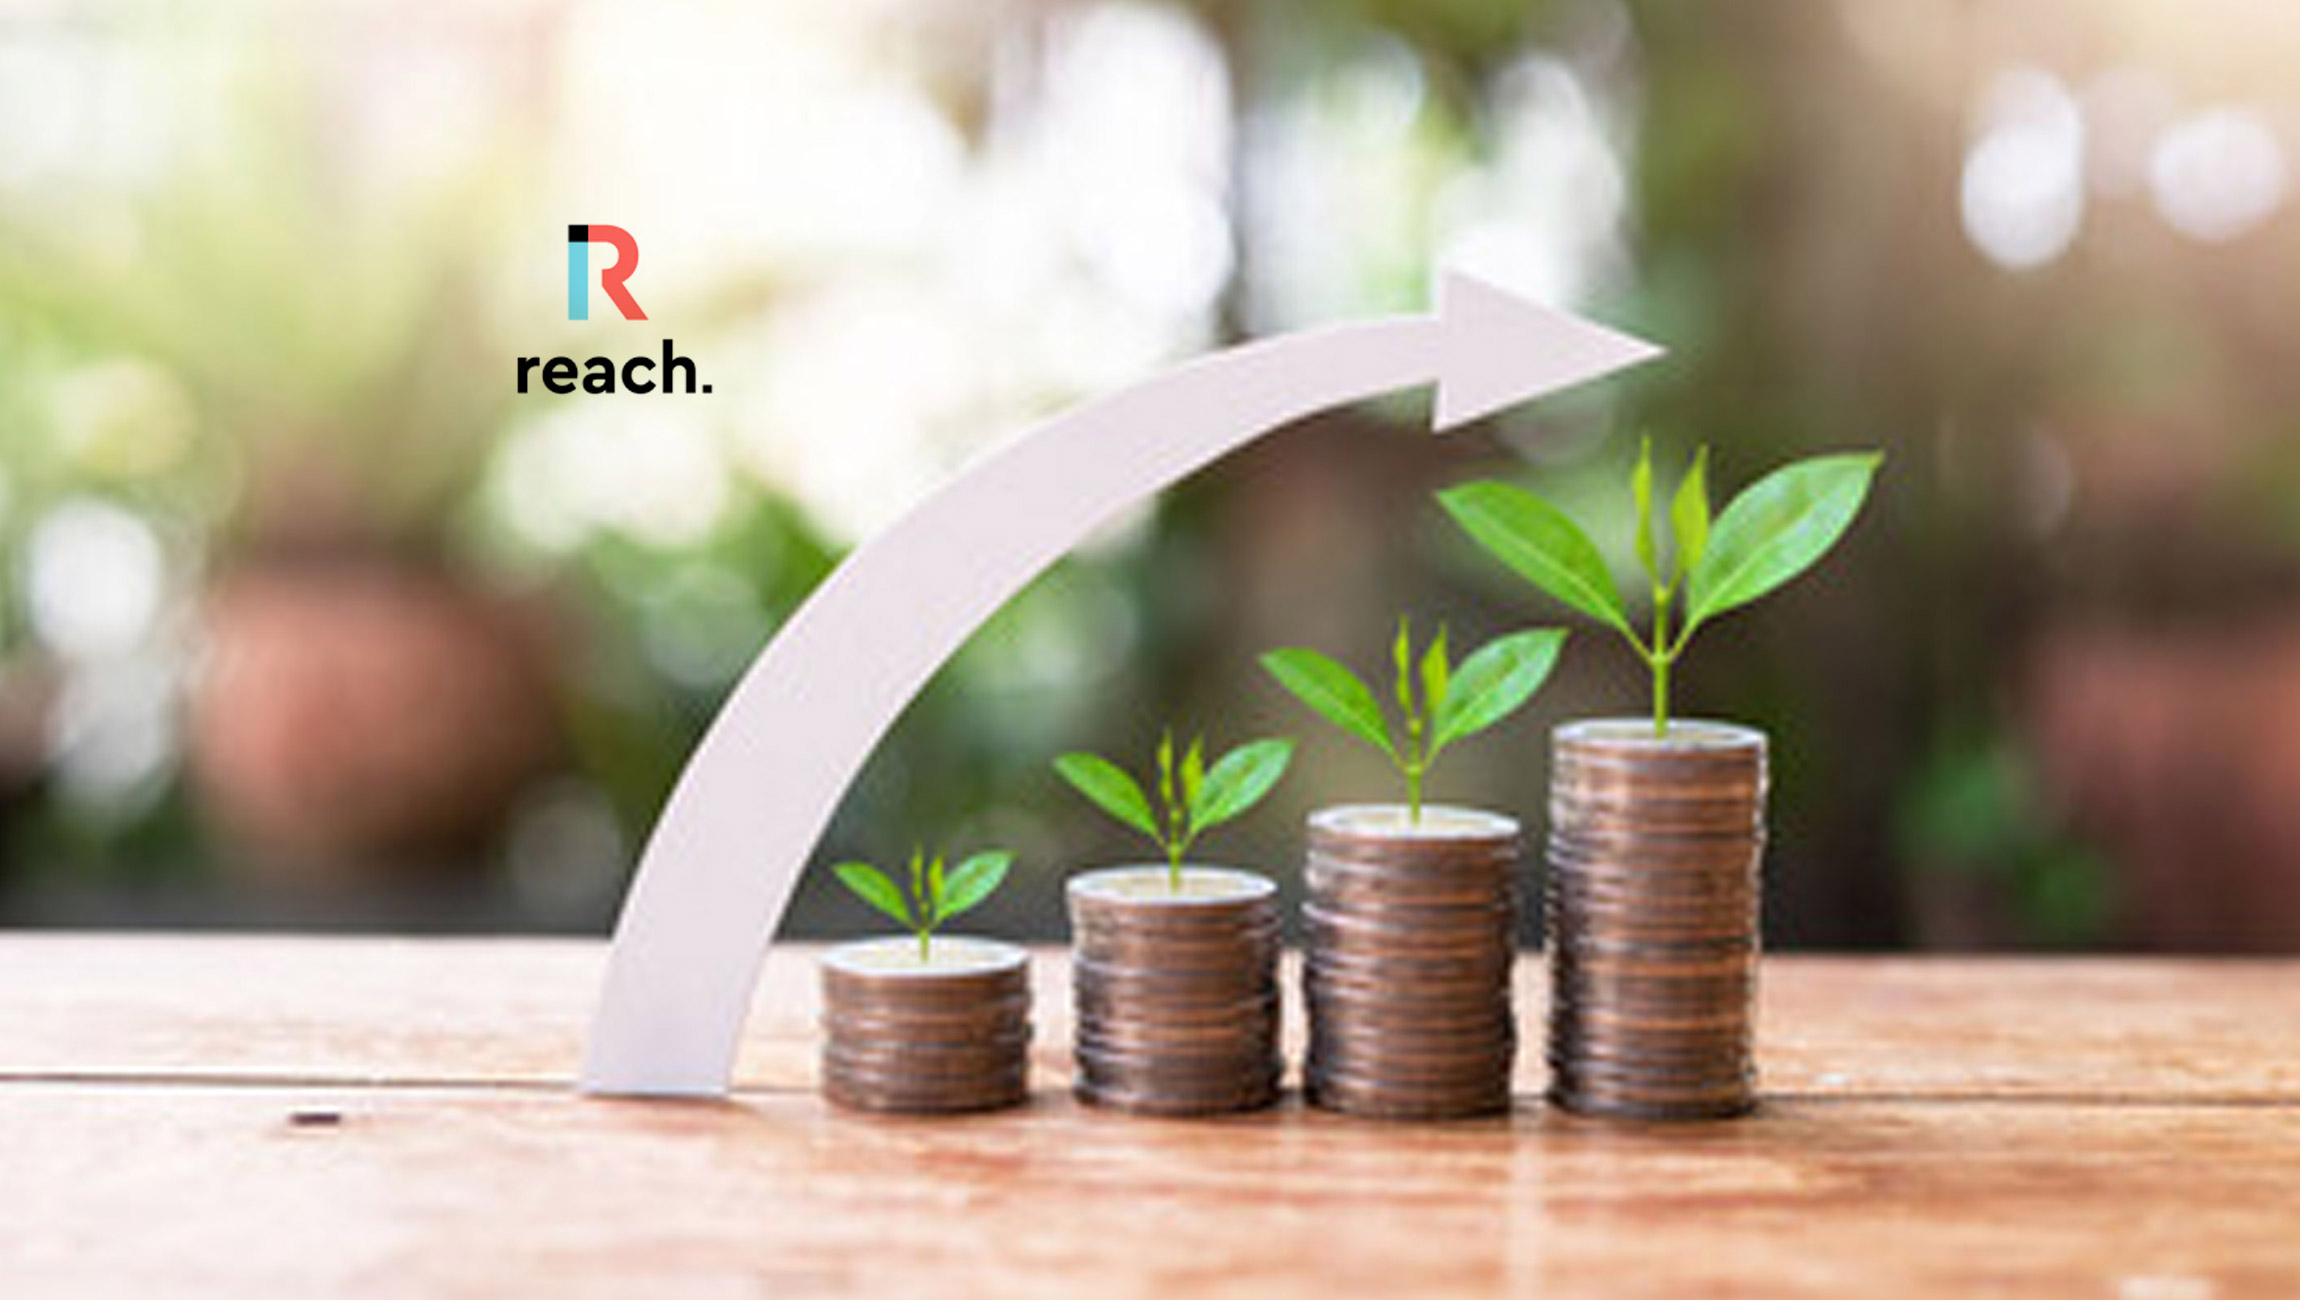 REACH Raises $7 Million Series A – Accelerating Momentum for Digital Workplace and Collaboration Platform with Investments from Grayhawk Capital, Pritzker Group and NFX